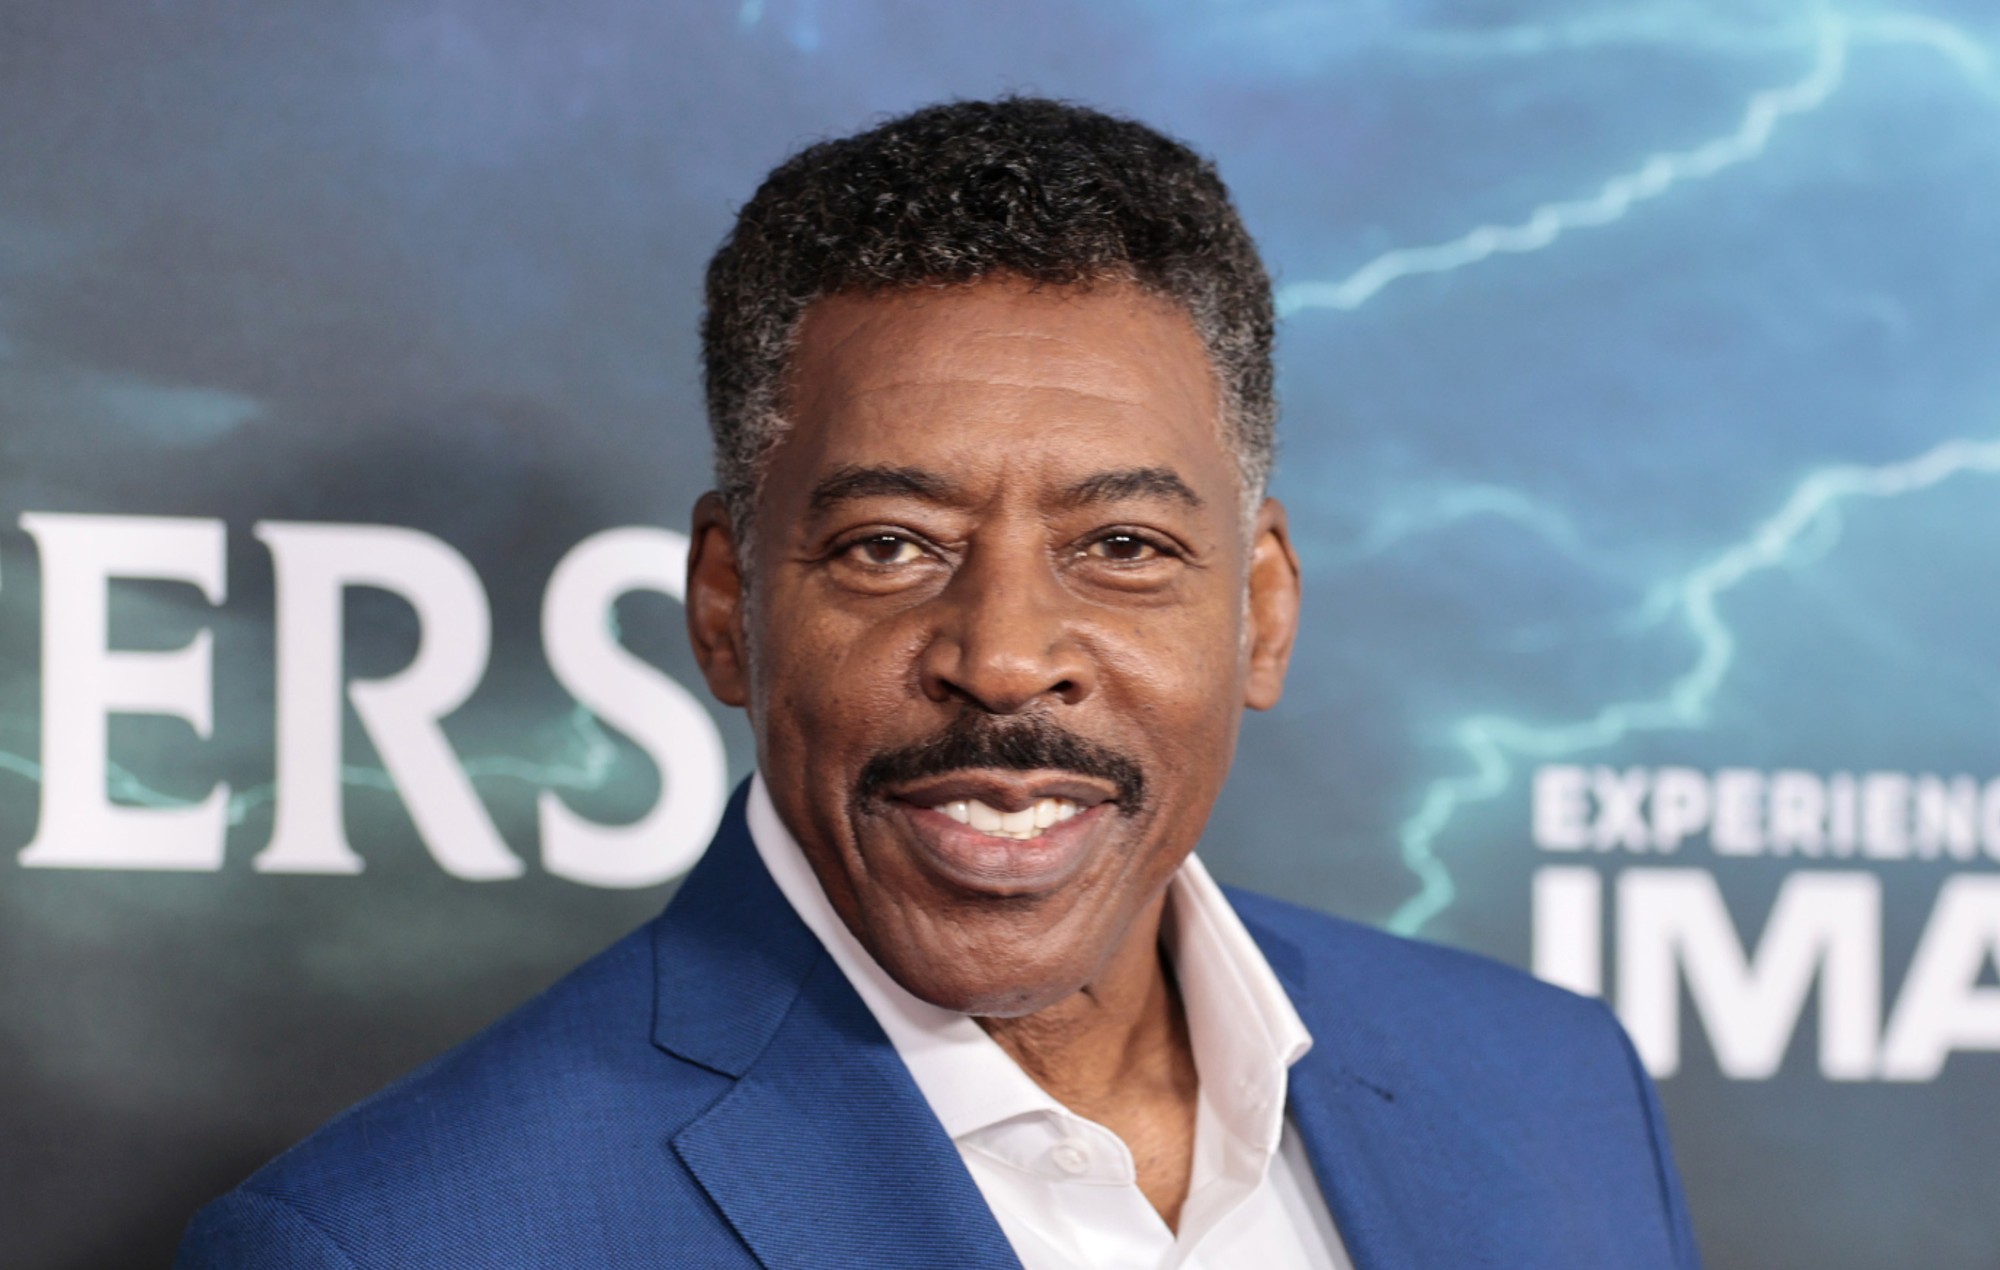 Ernie Hudson says he was “pushed aside” in ‘Ghostbusters’ marketing: “It felt deliberate”